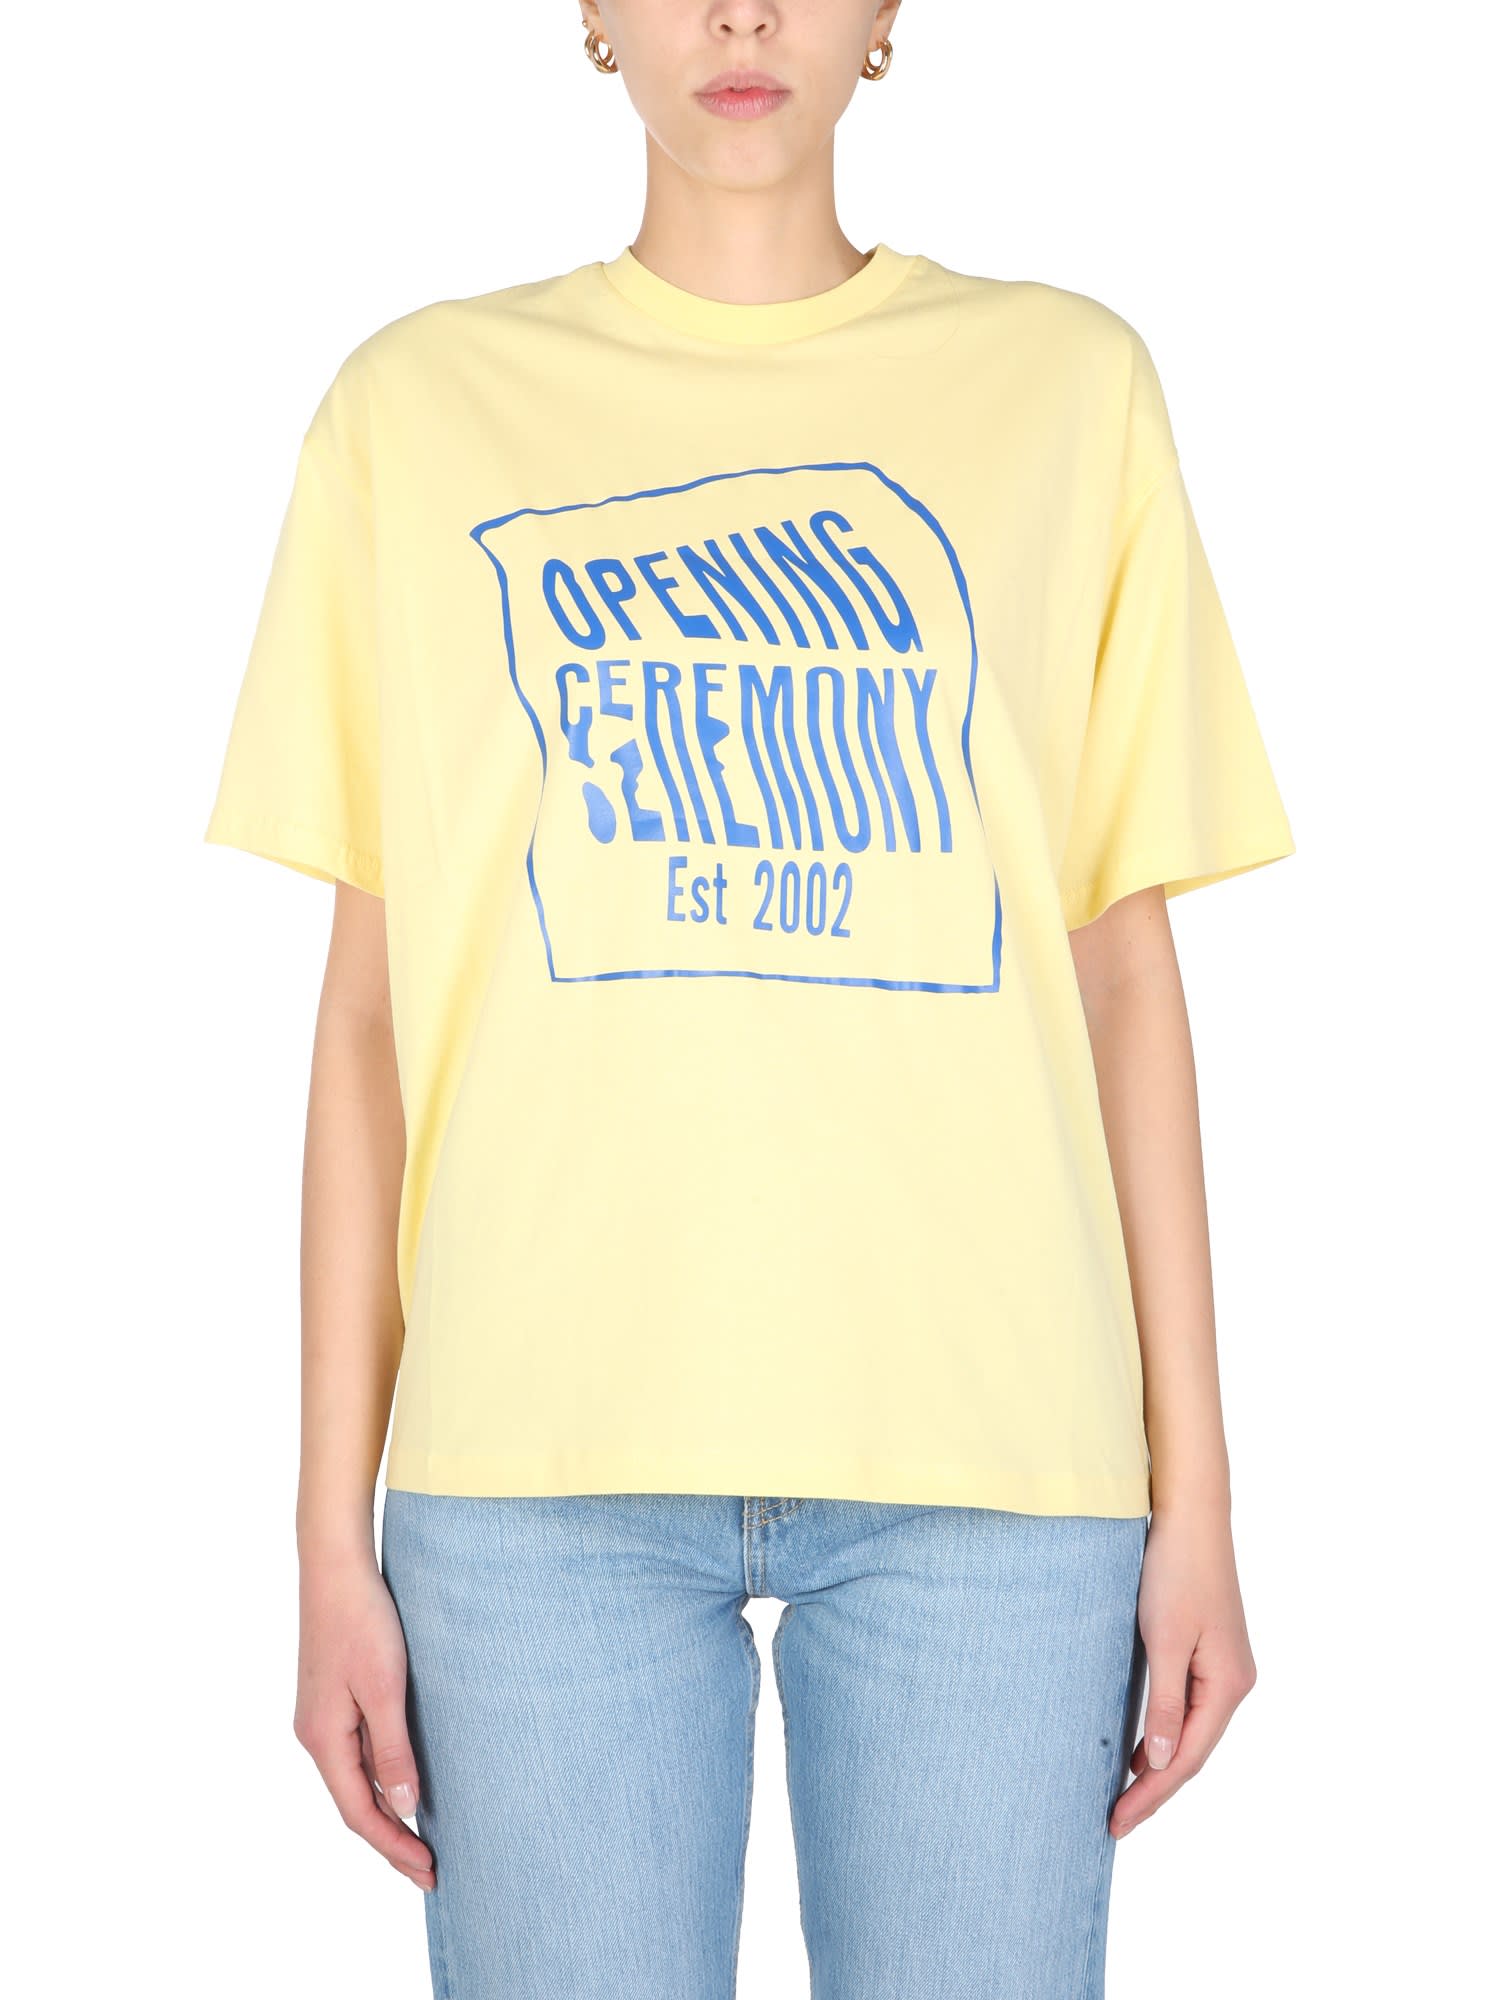 OPENING CEREMONY T-SHIRT WITH LOGO PRINT,YWAA010 S21JER0011747